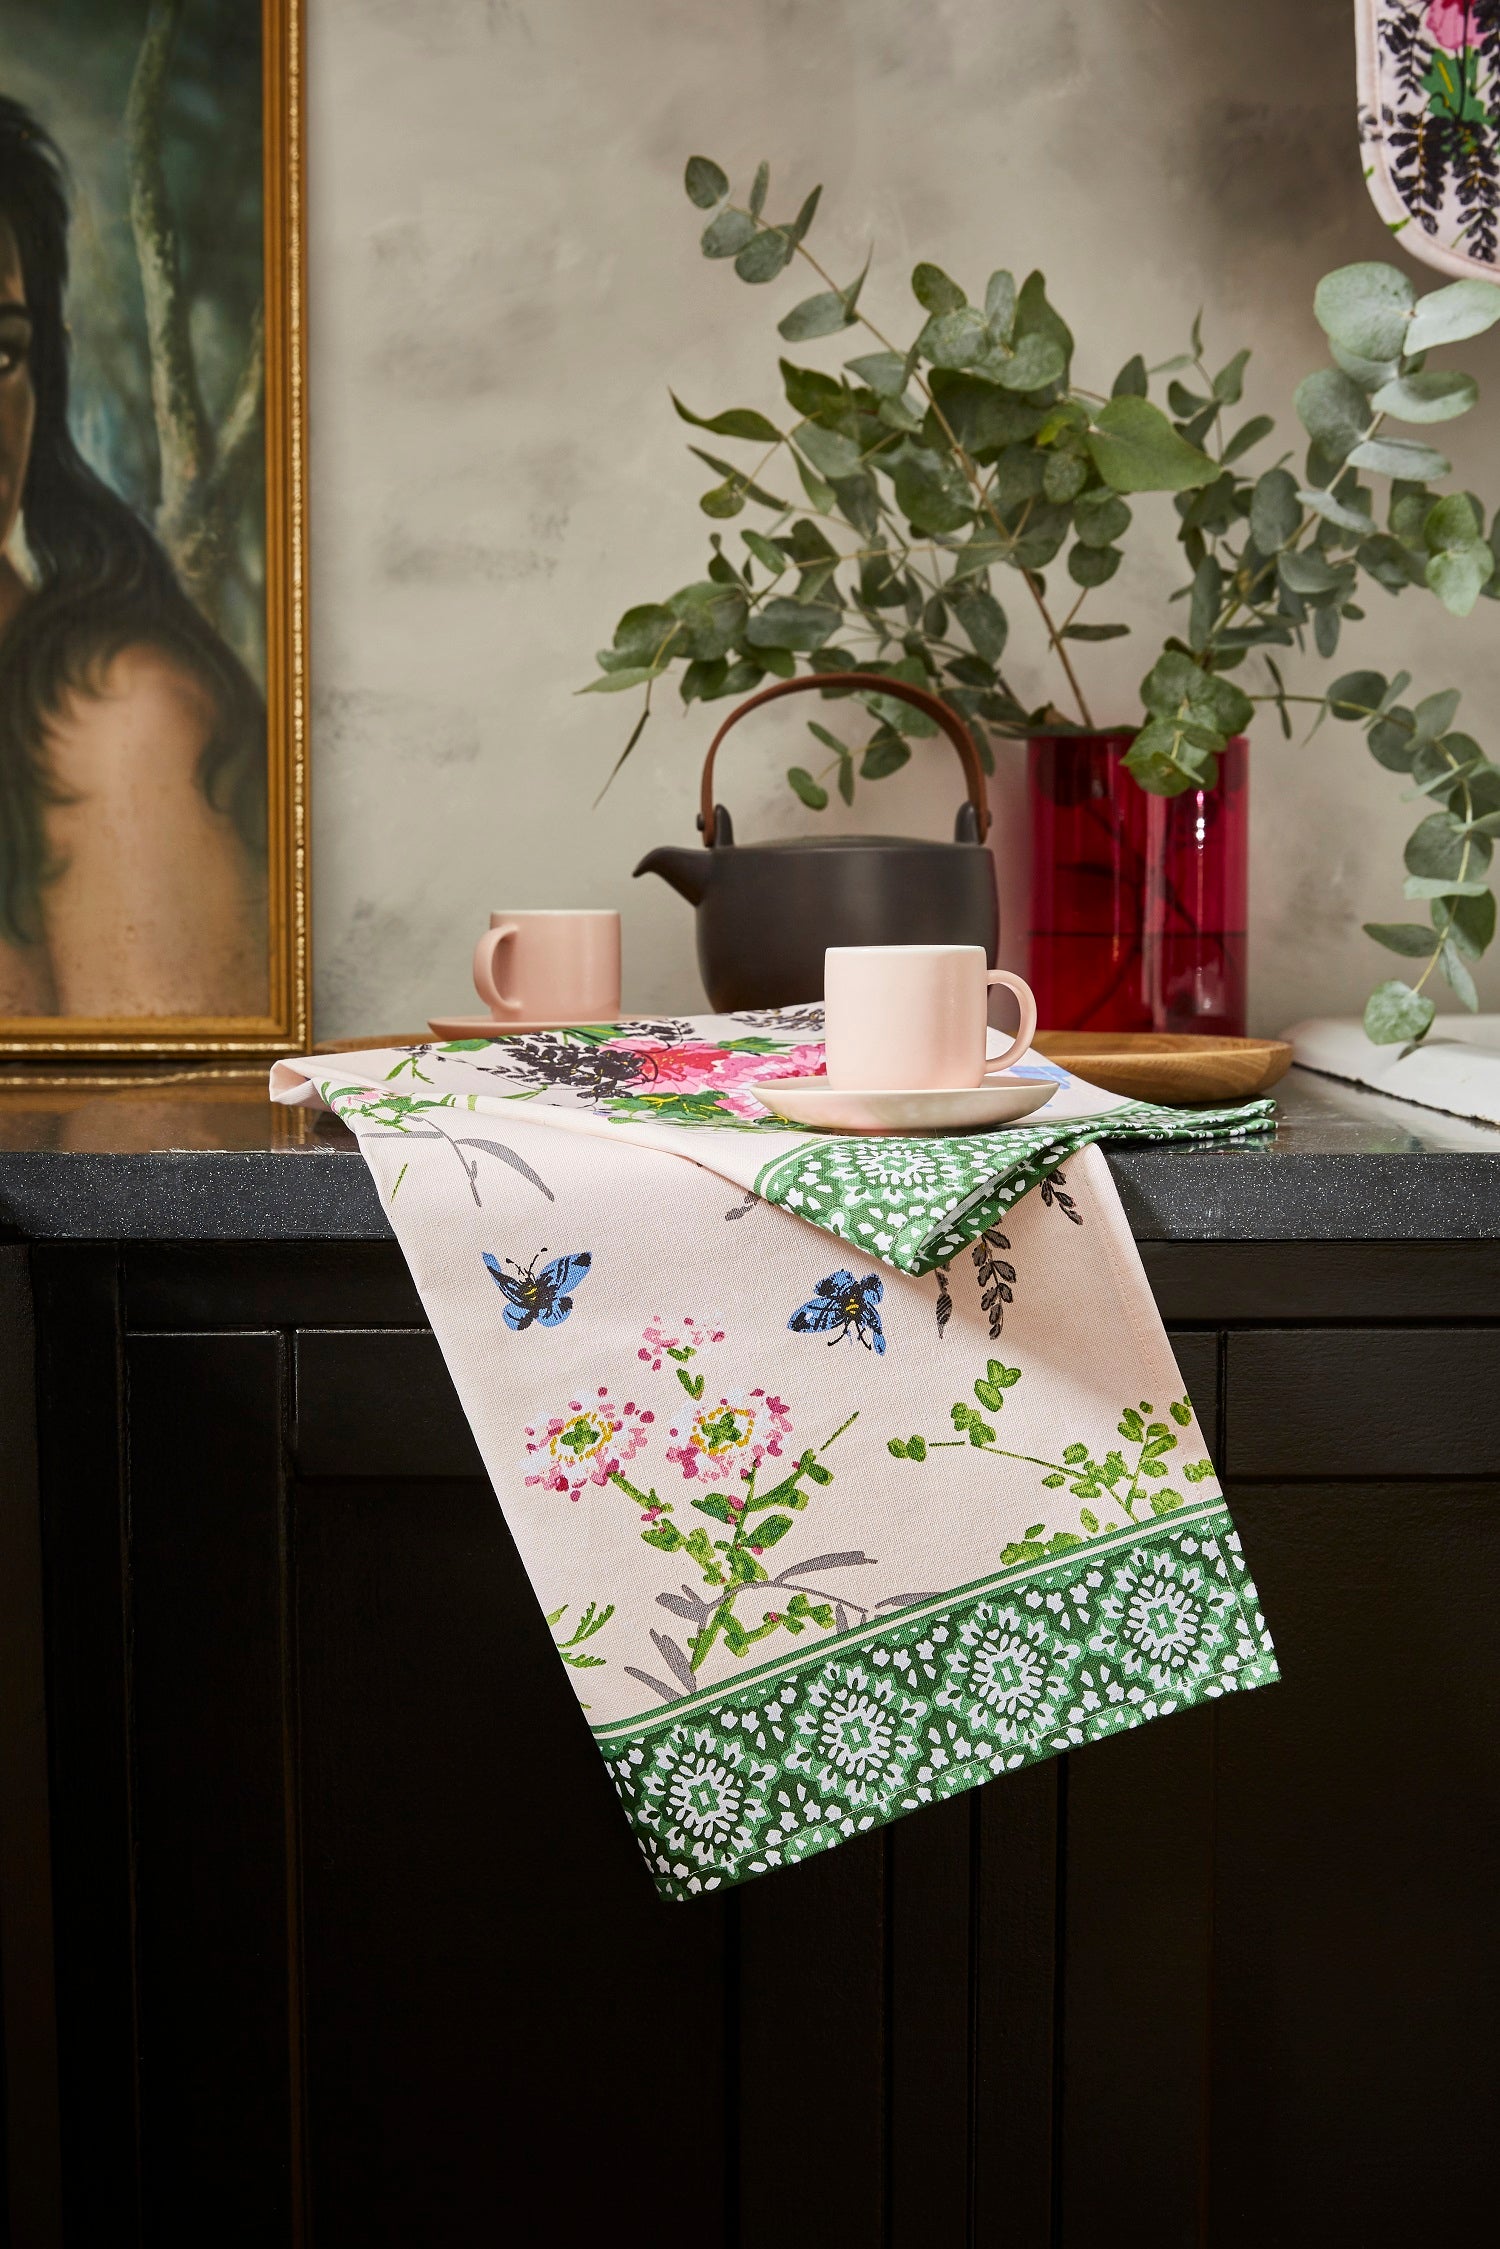 Ulster Weavers, "Madame Butterfly", Pure cotton printed tea towel. - Home Landing